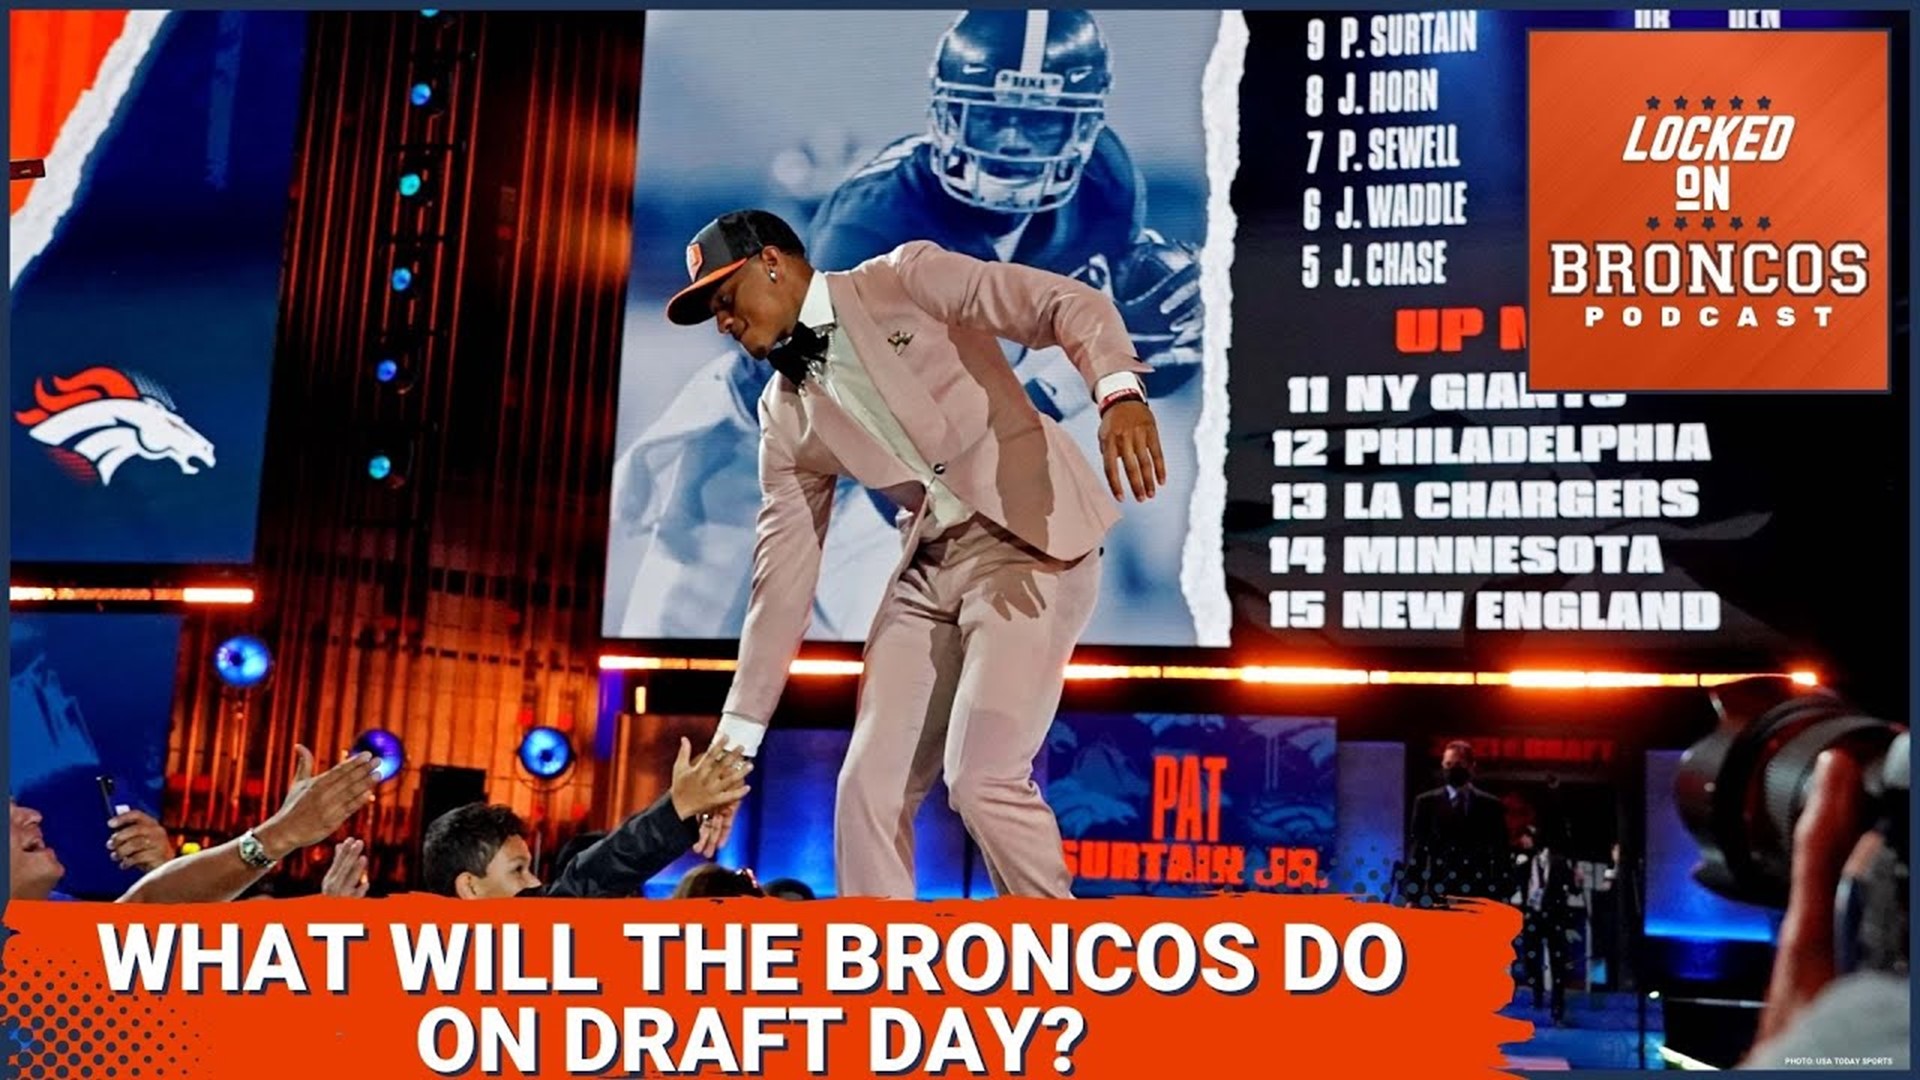 As George Paton and Sean Payton build toward their first NFL Draft together, what will the Broncos do? Could the Broncos trade back into Round 1?